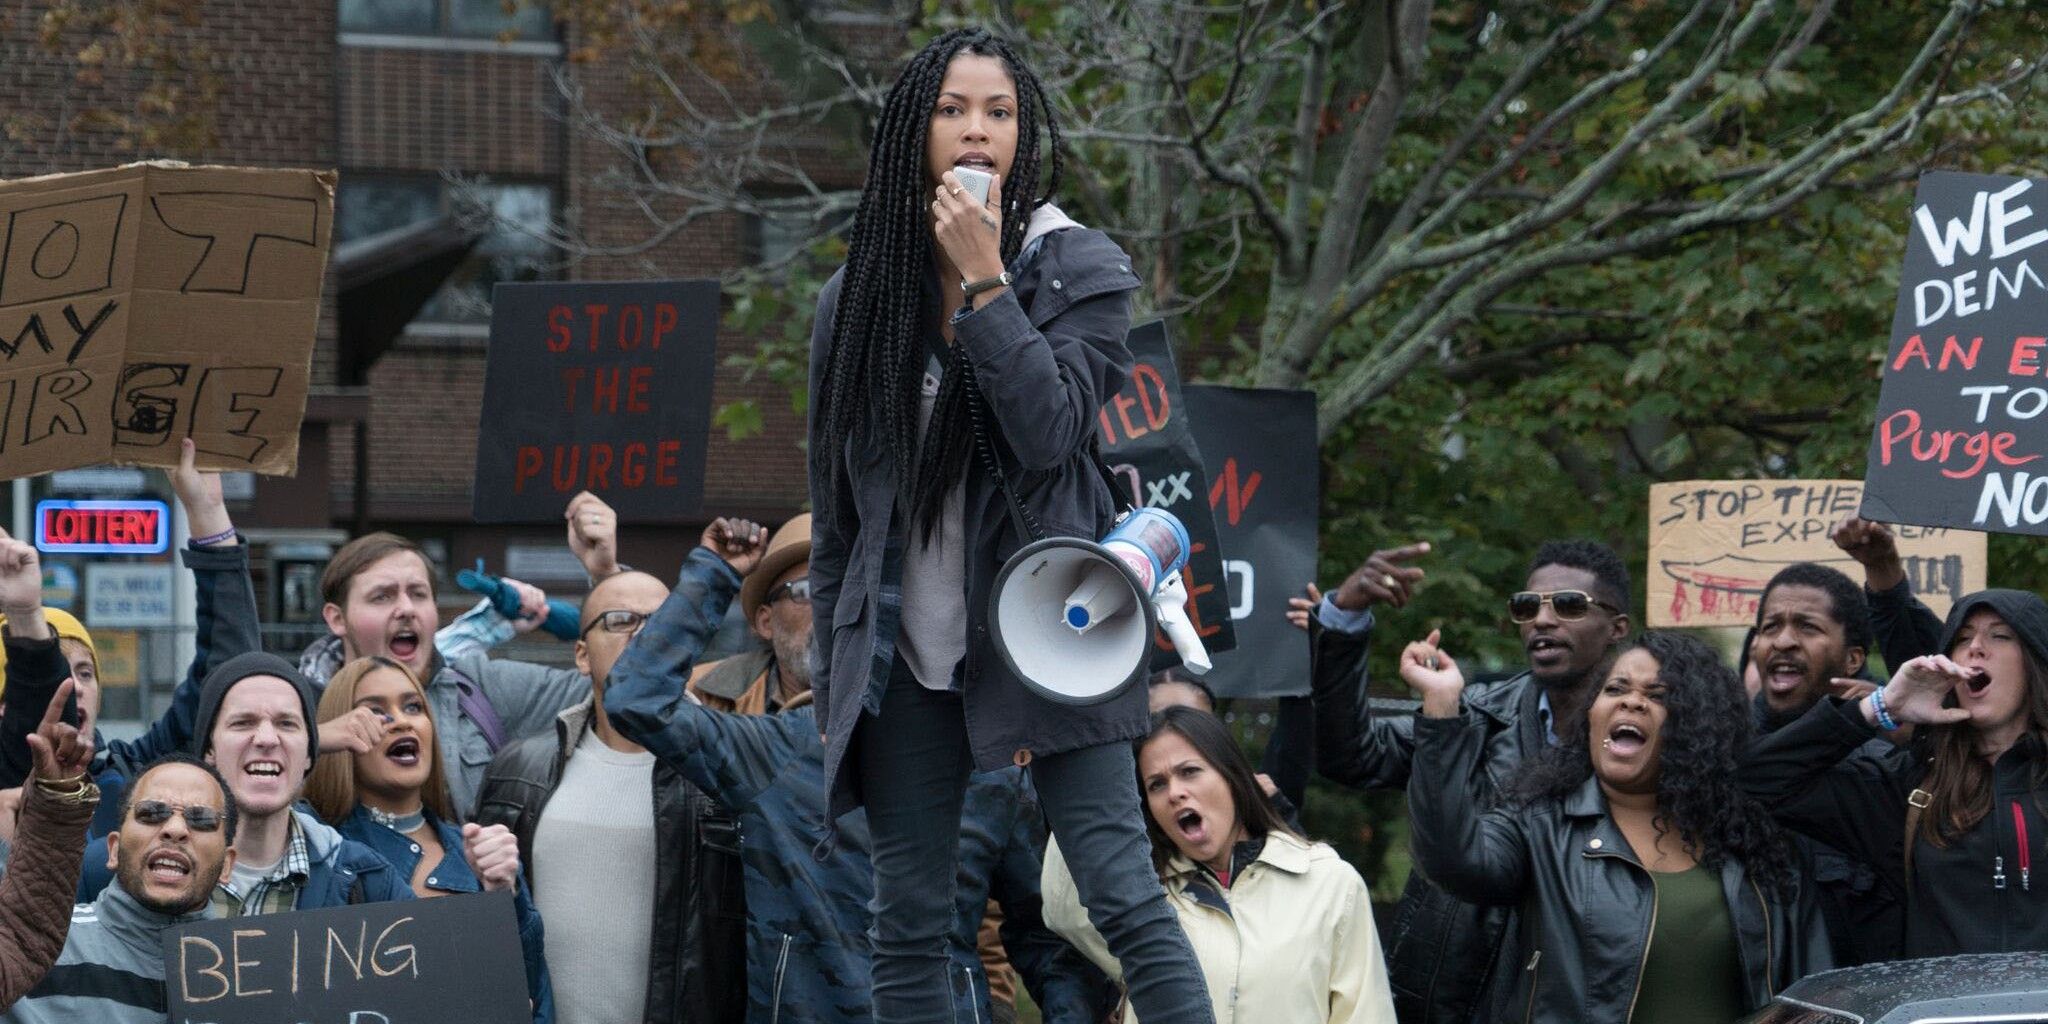 A woman leads a protest in The First Purge